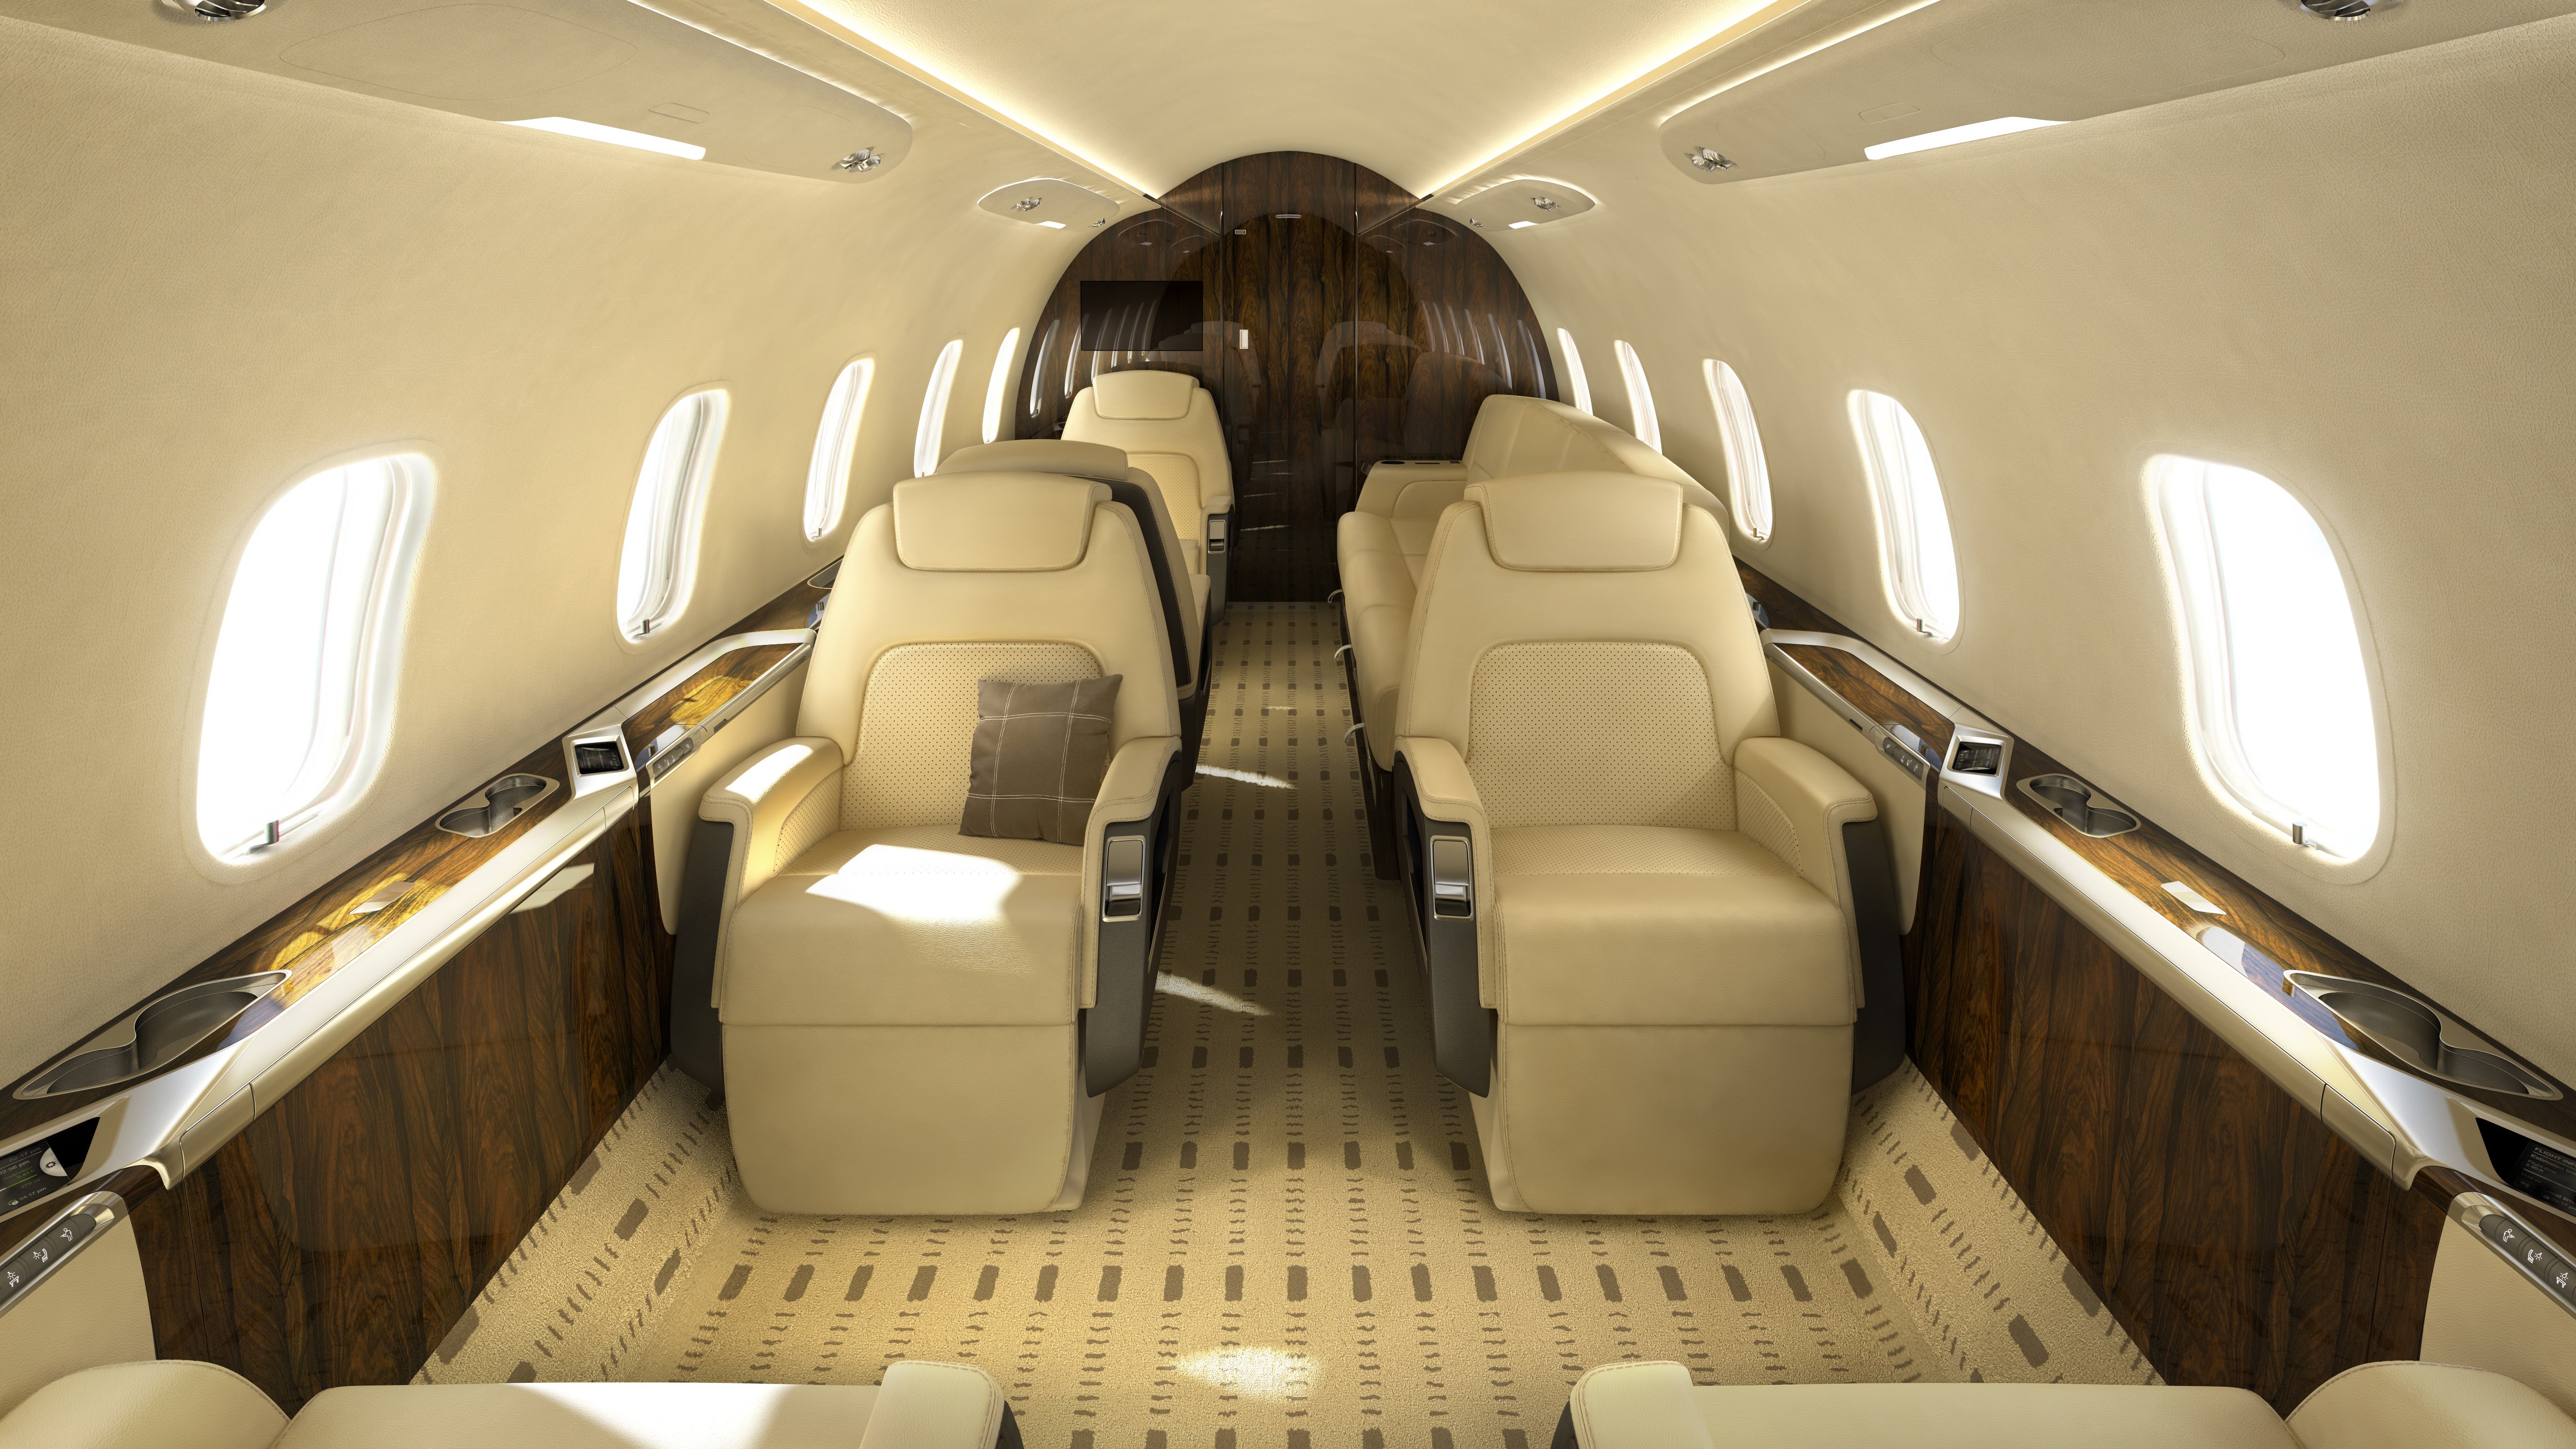 252 Private Jets Could be Delivered to TX Over Next 10 Years